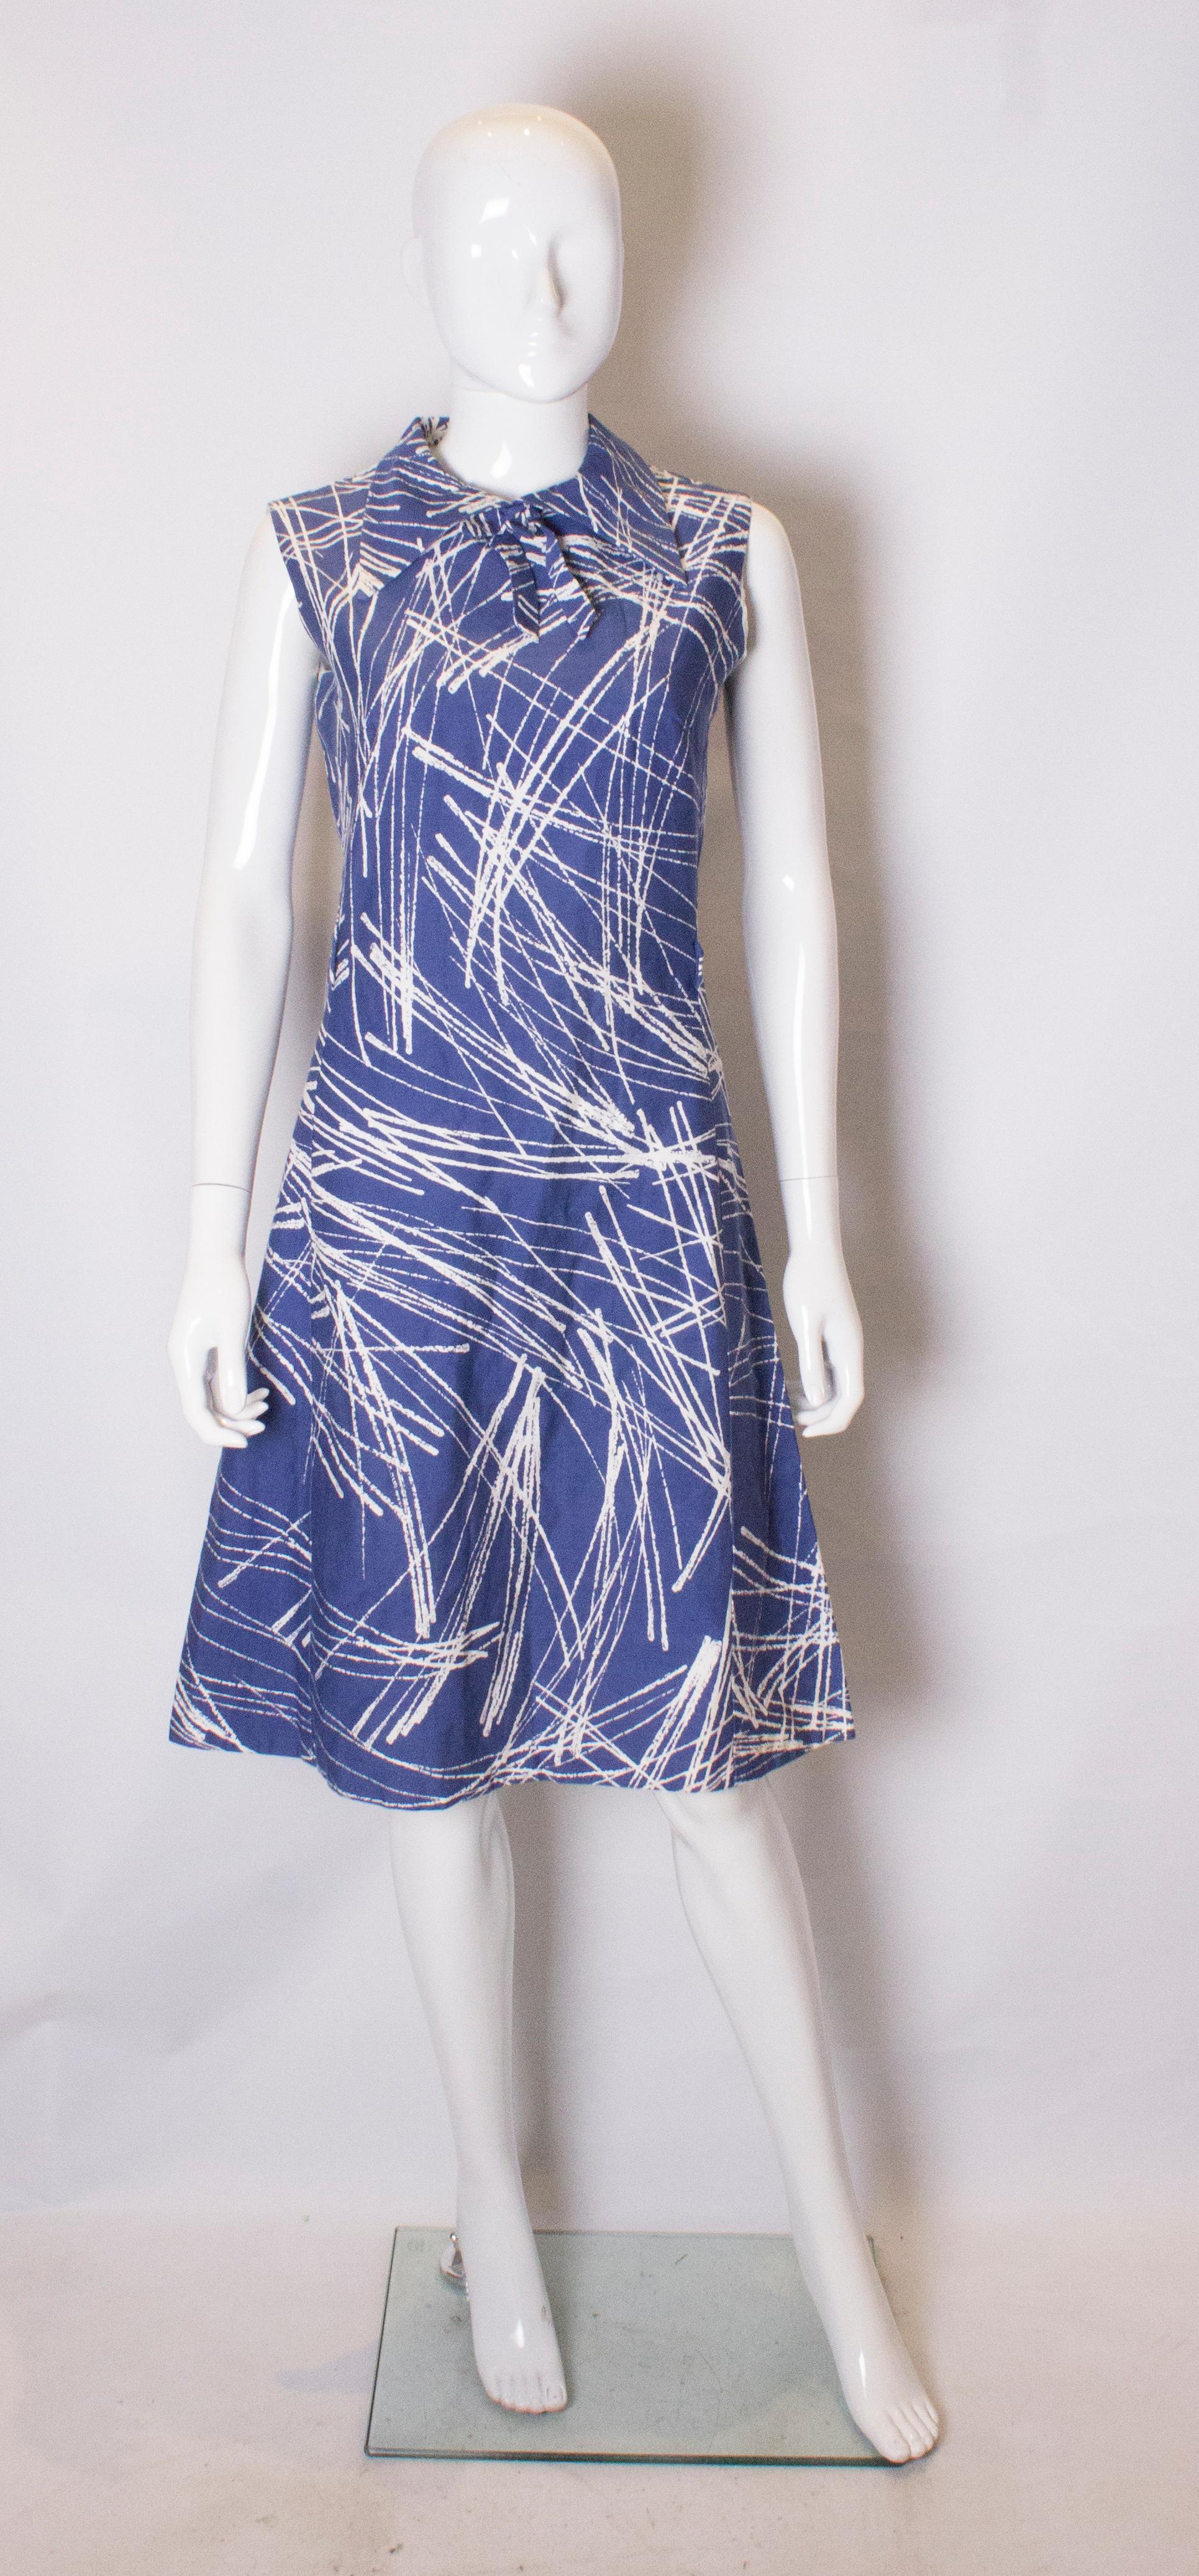 A vintage dress by Montigo Bay day dress. The dress has  a blue background with white print. It has a collar and tie at the neck and a central back zip.